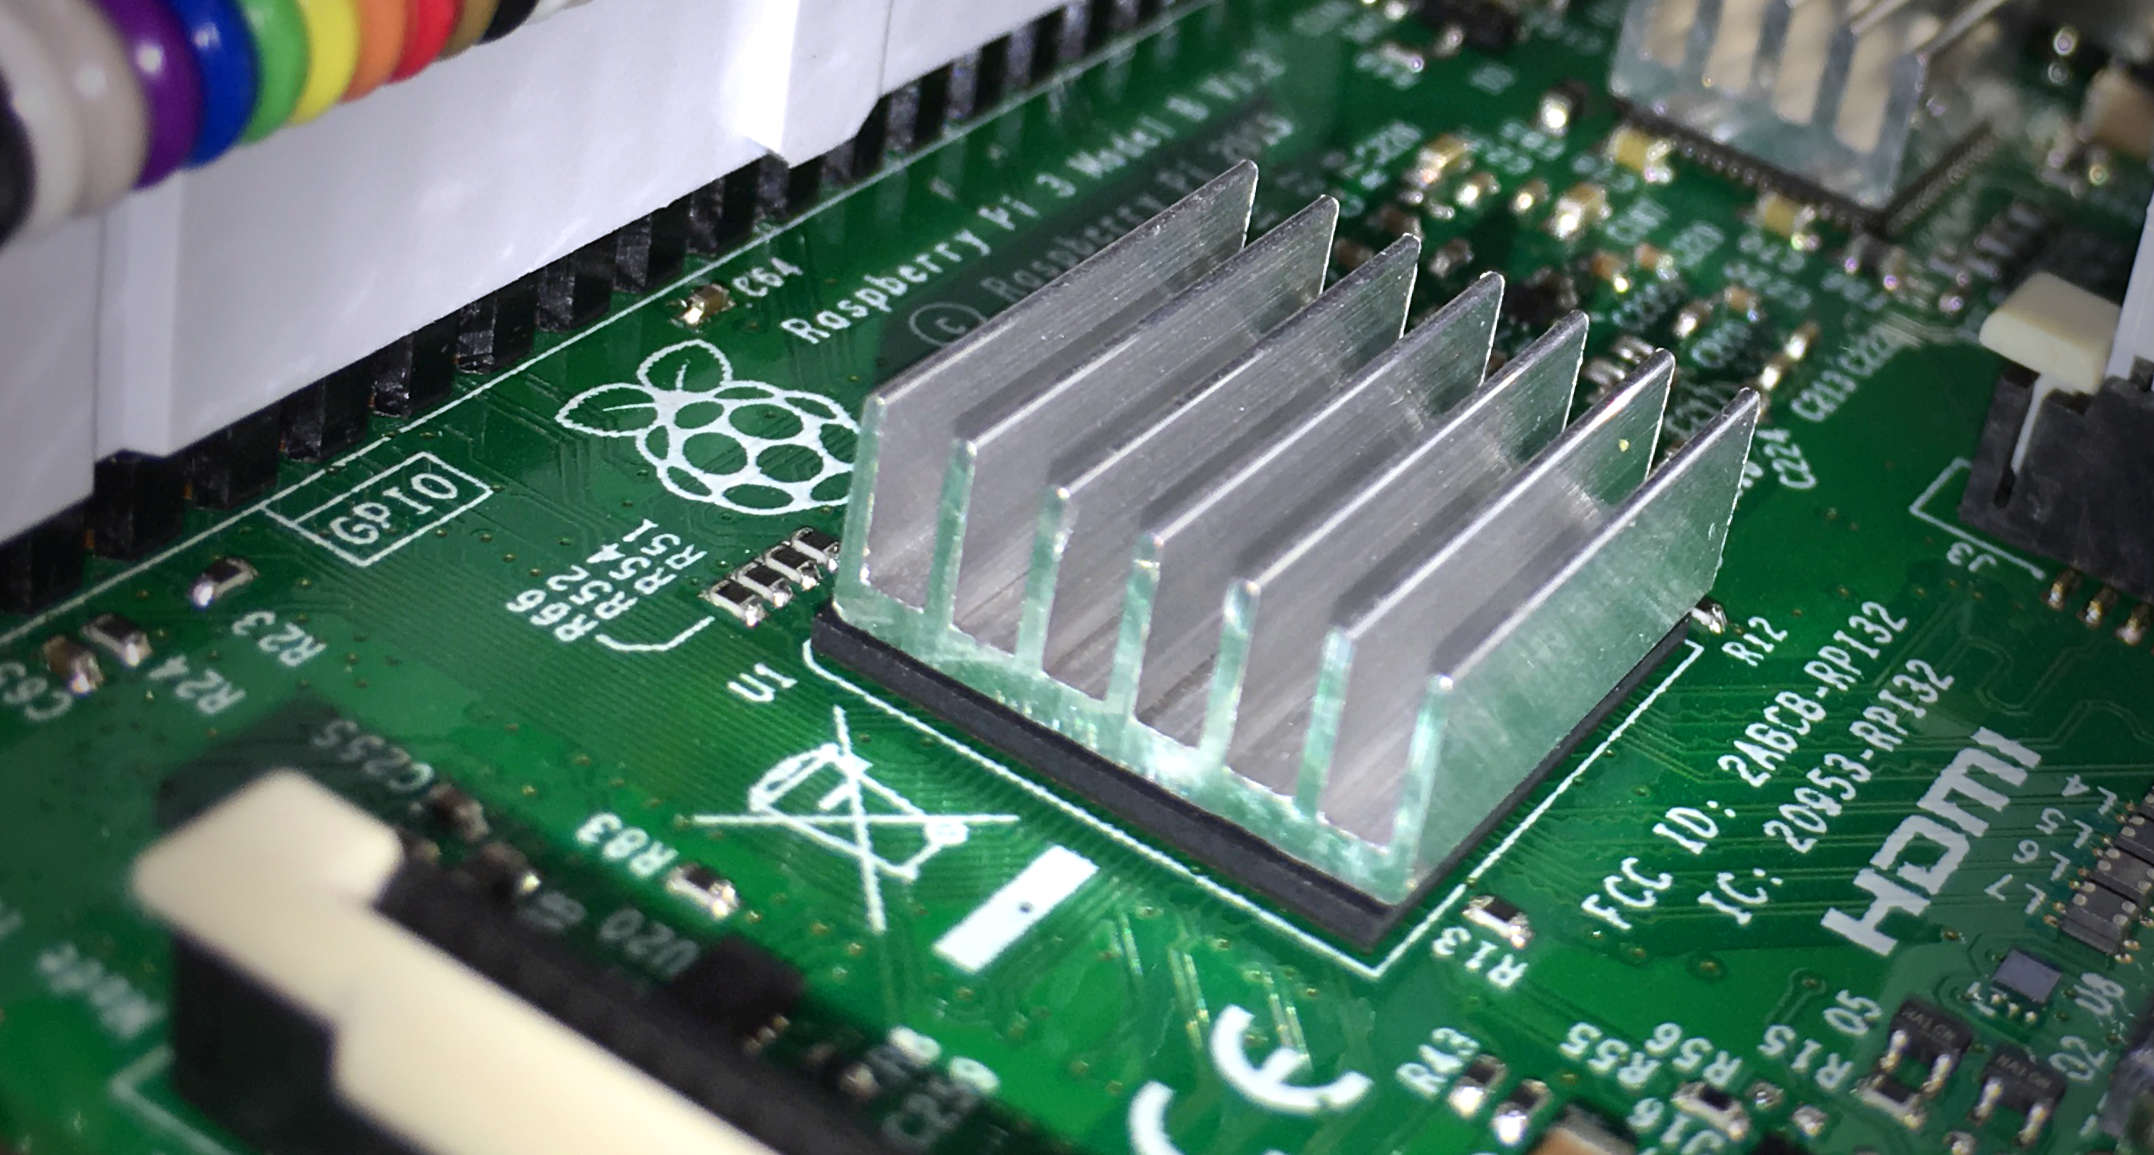 Abstract image of the Raspberry Pi.